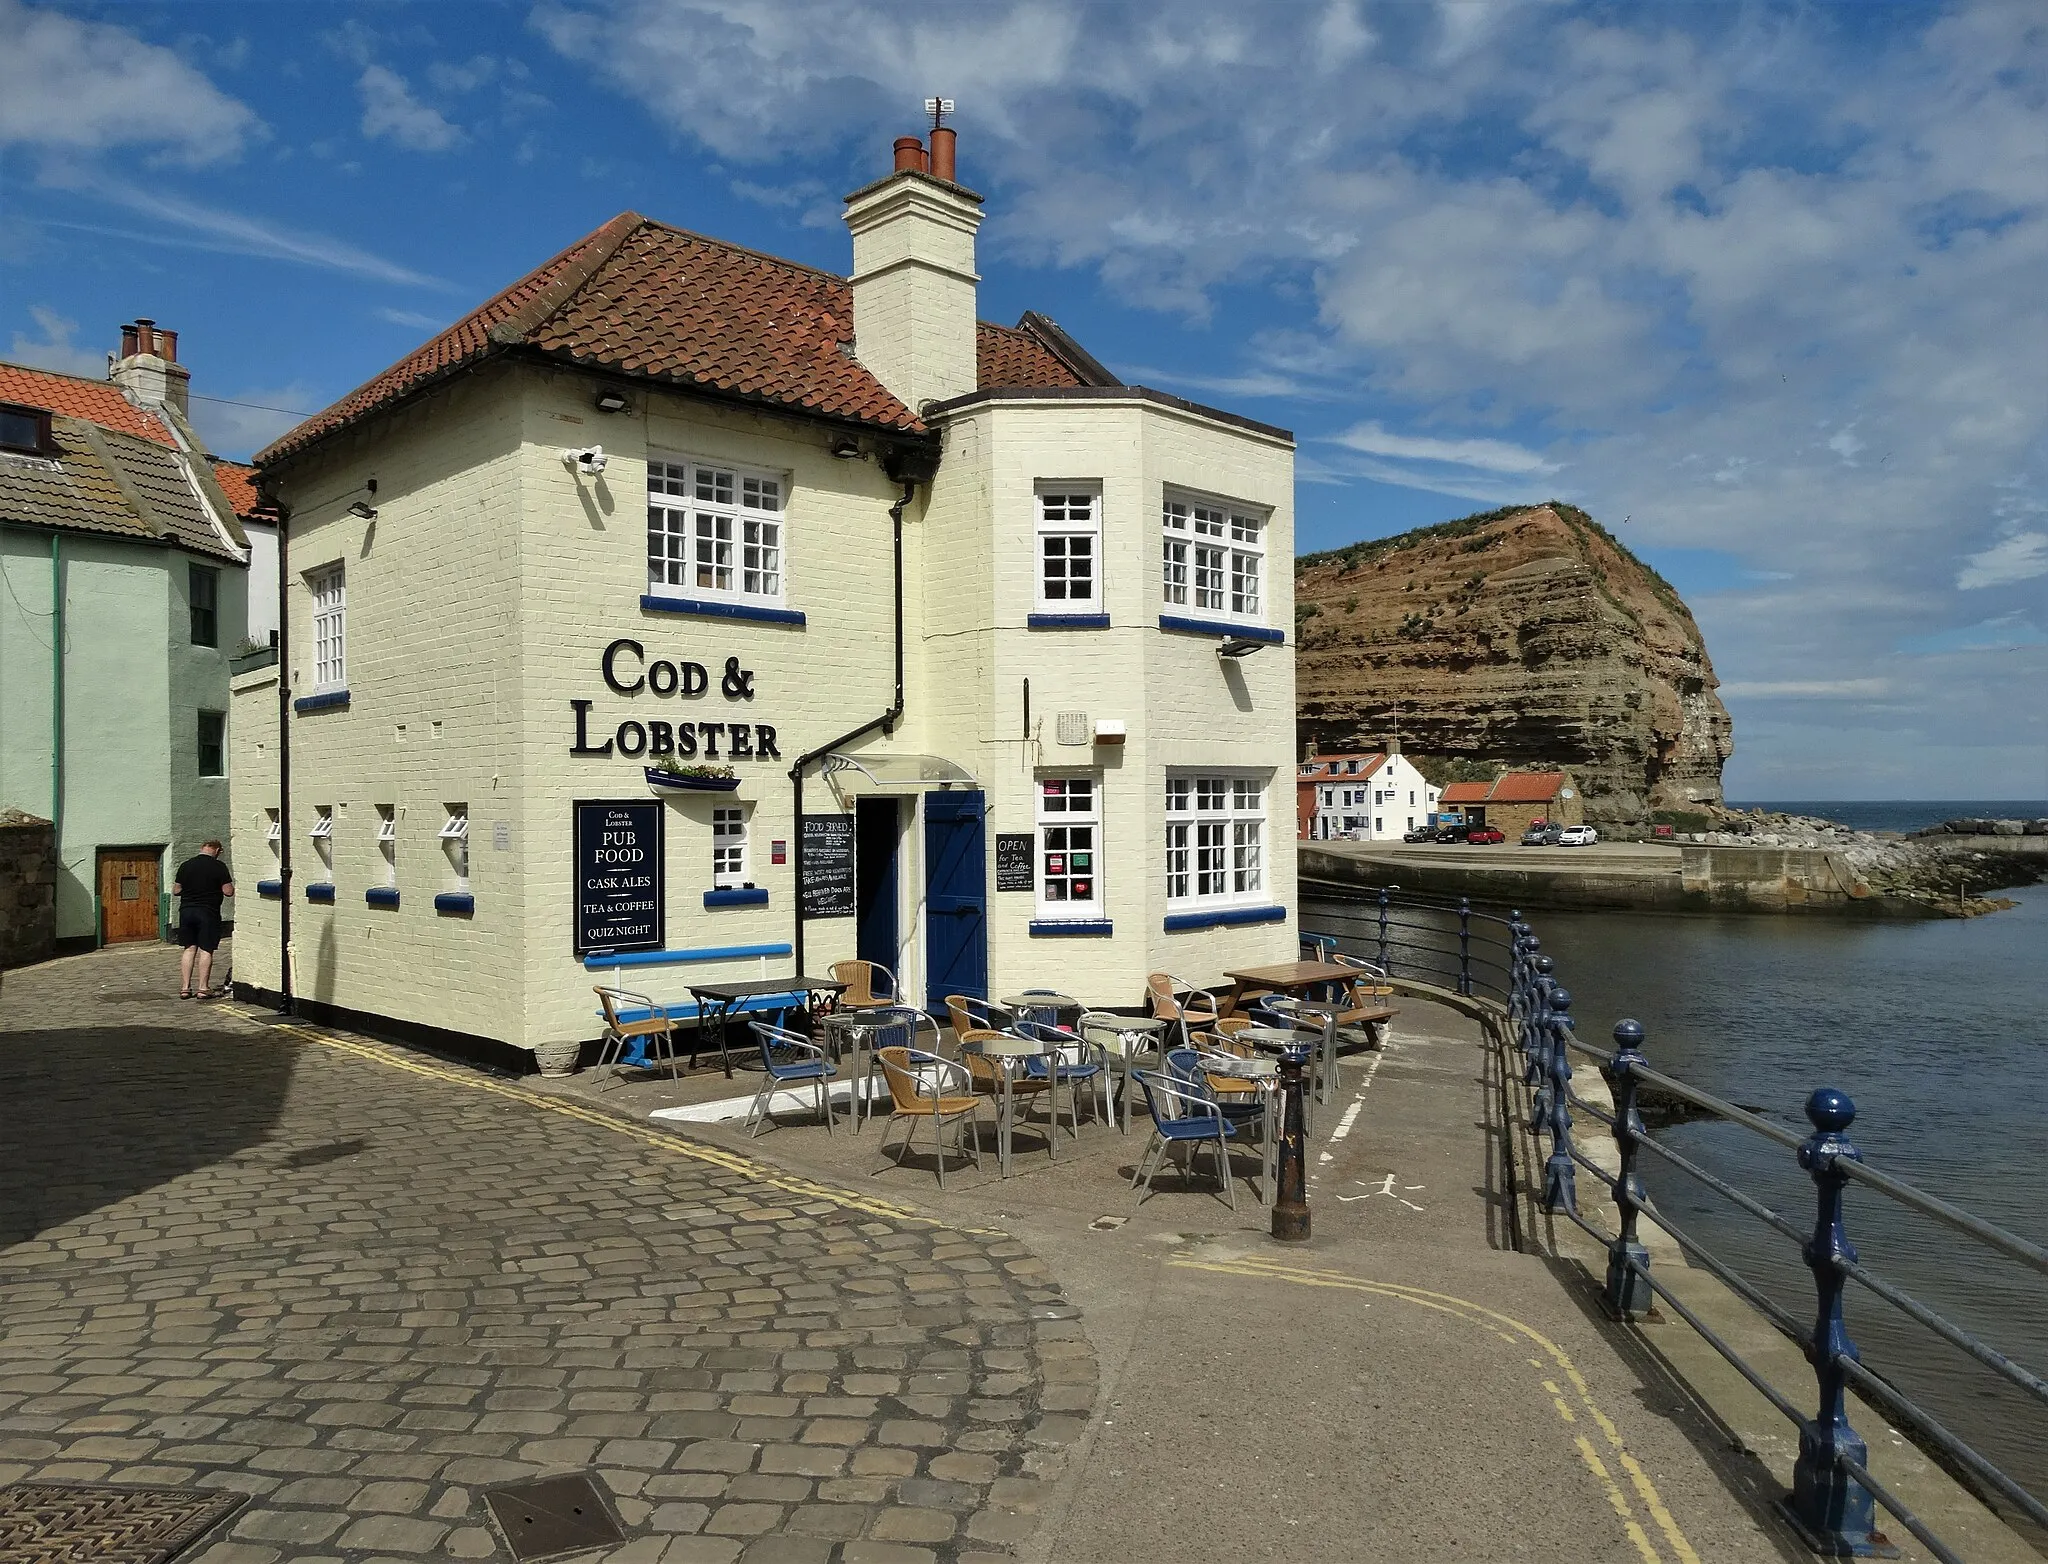 Photo showing: "The Cod and Lobster" in Staithes